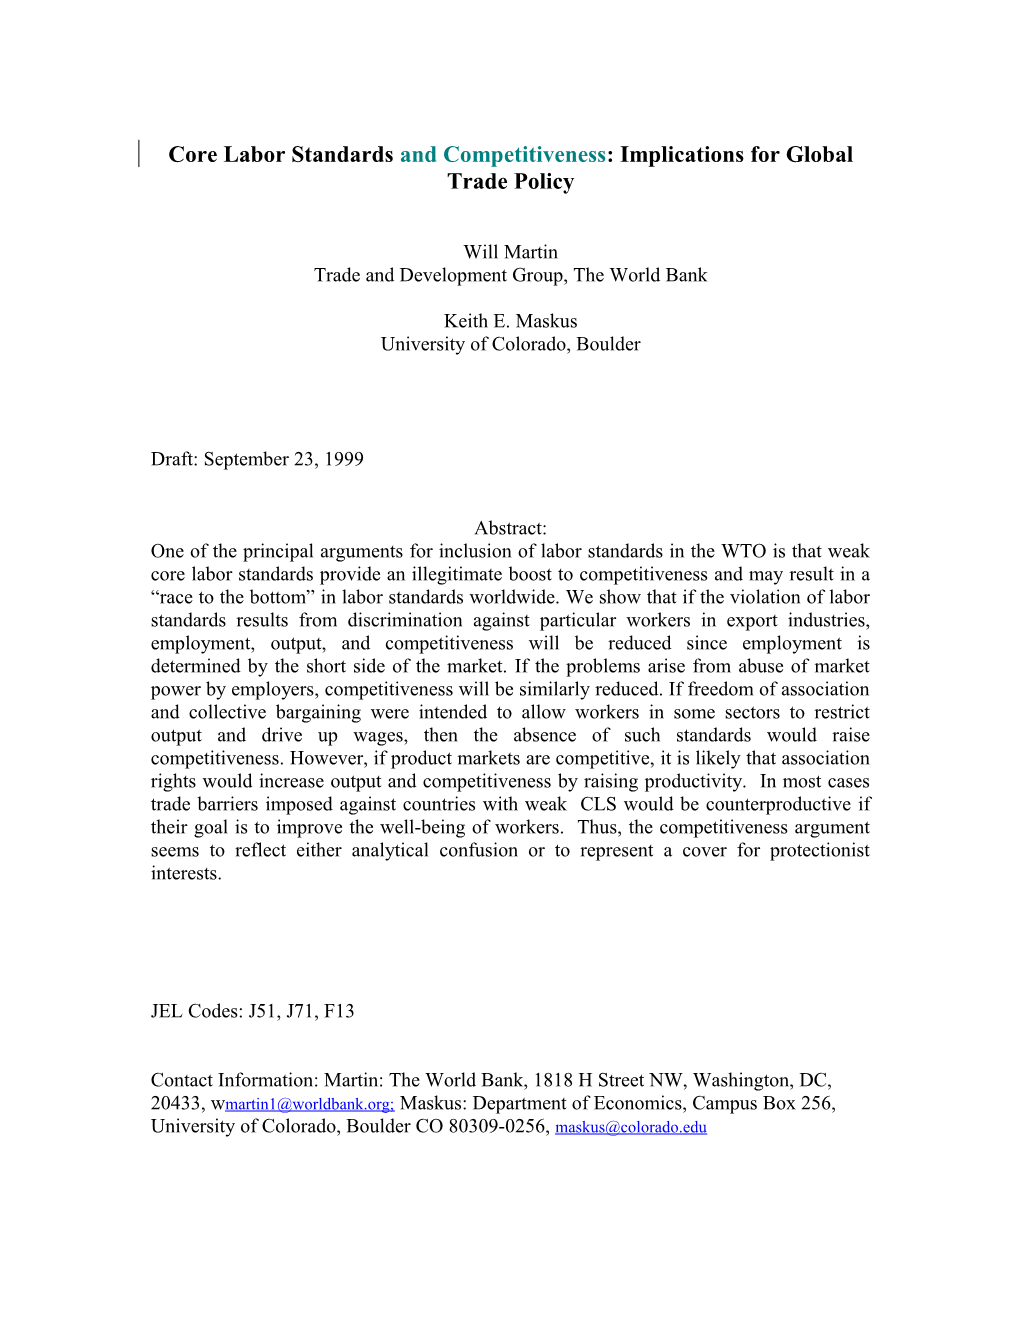 The Economics of Core Labor Standards: Implications for Global Trade Policy